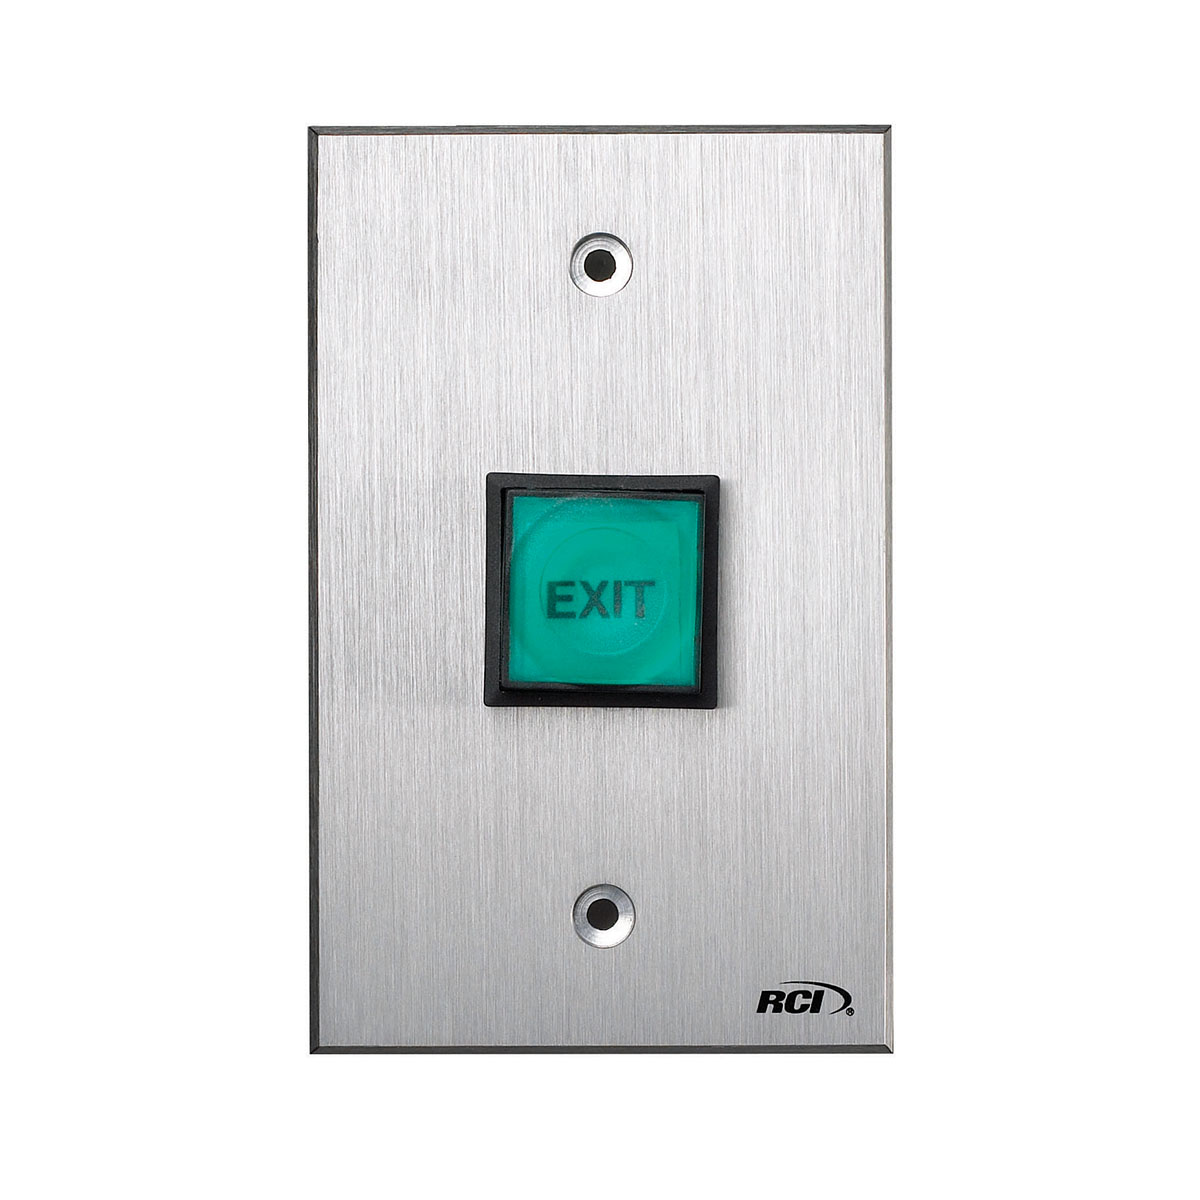 975-TD-05 x 28 Dormakaba Rutherford Controls Electronic Time-Delay Push Button Brushed Anodized Aluminum Faceplate 12VDC